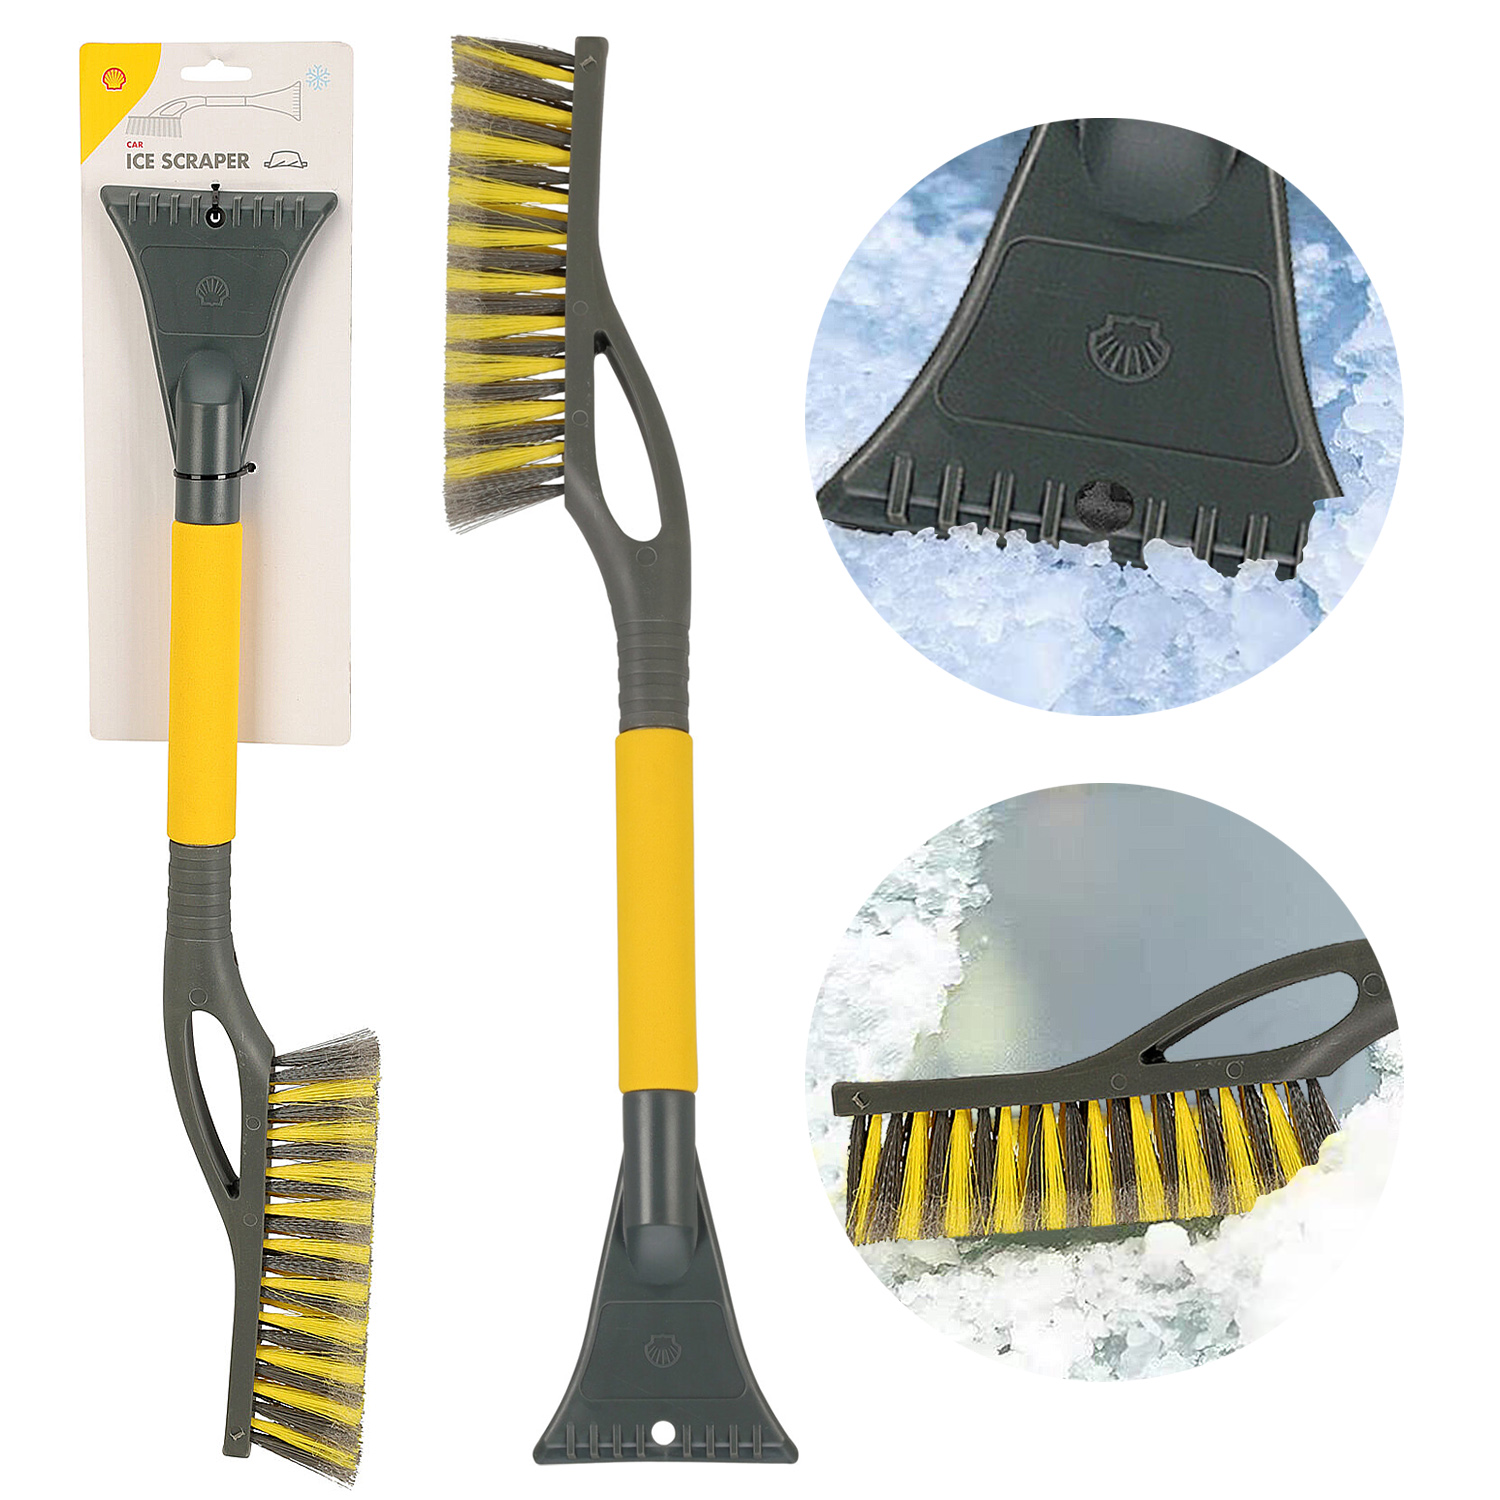 Shell 2-in-1 Ice Scraper & Snow Brush - WeeklyDeals4Less